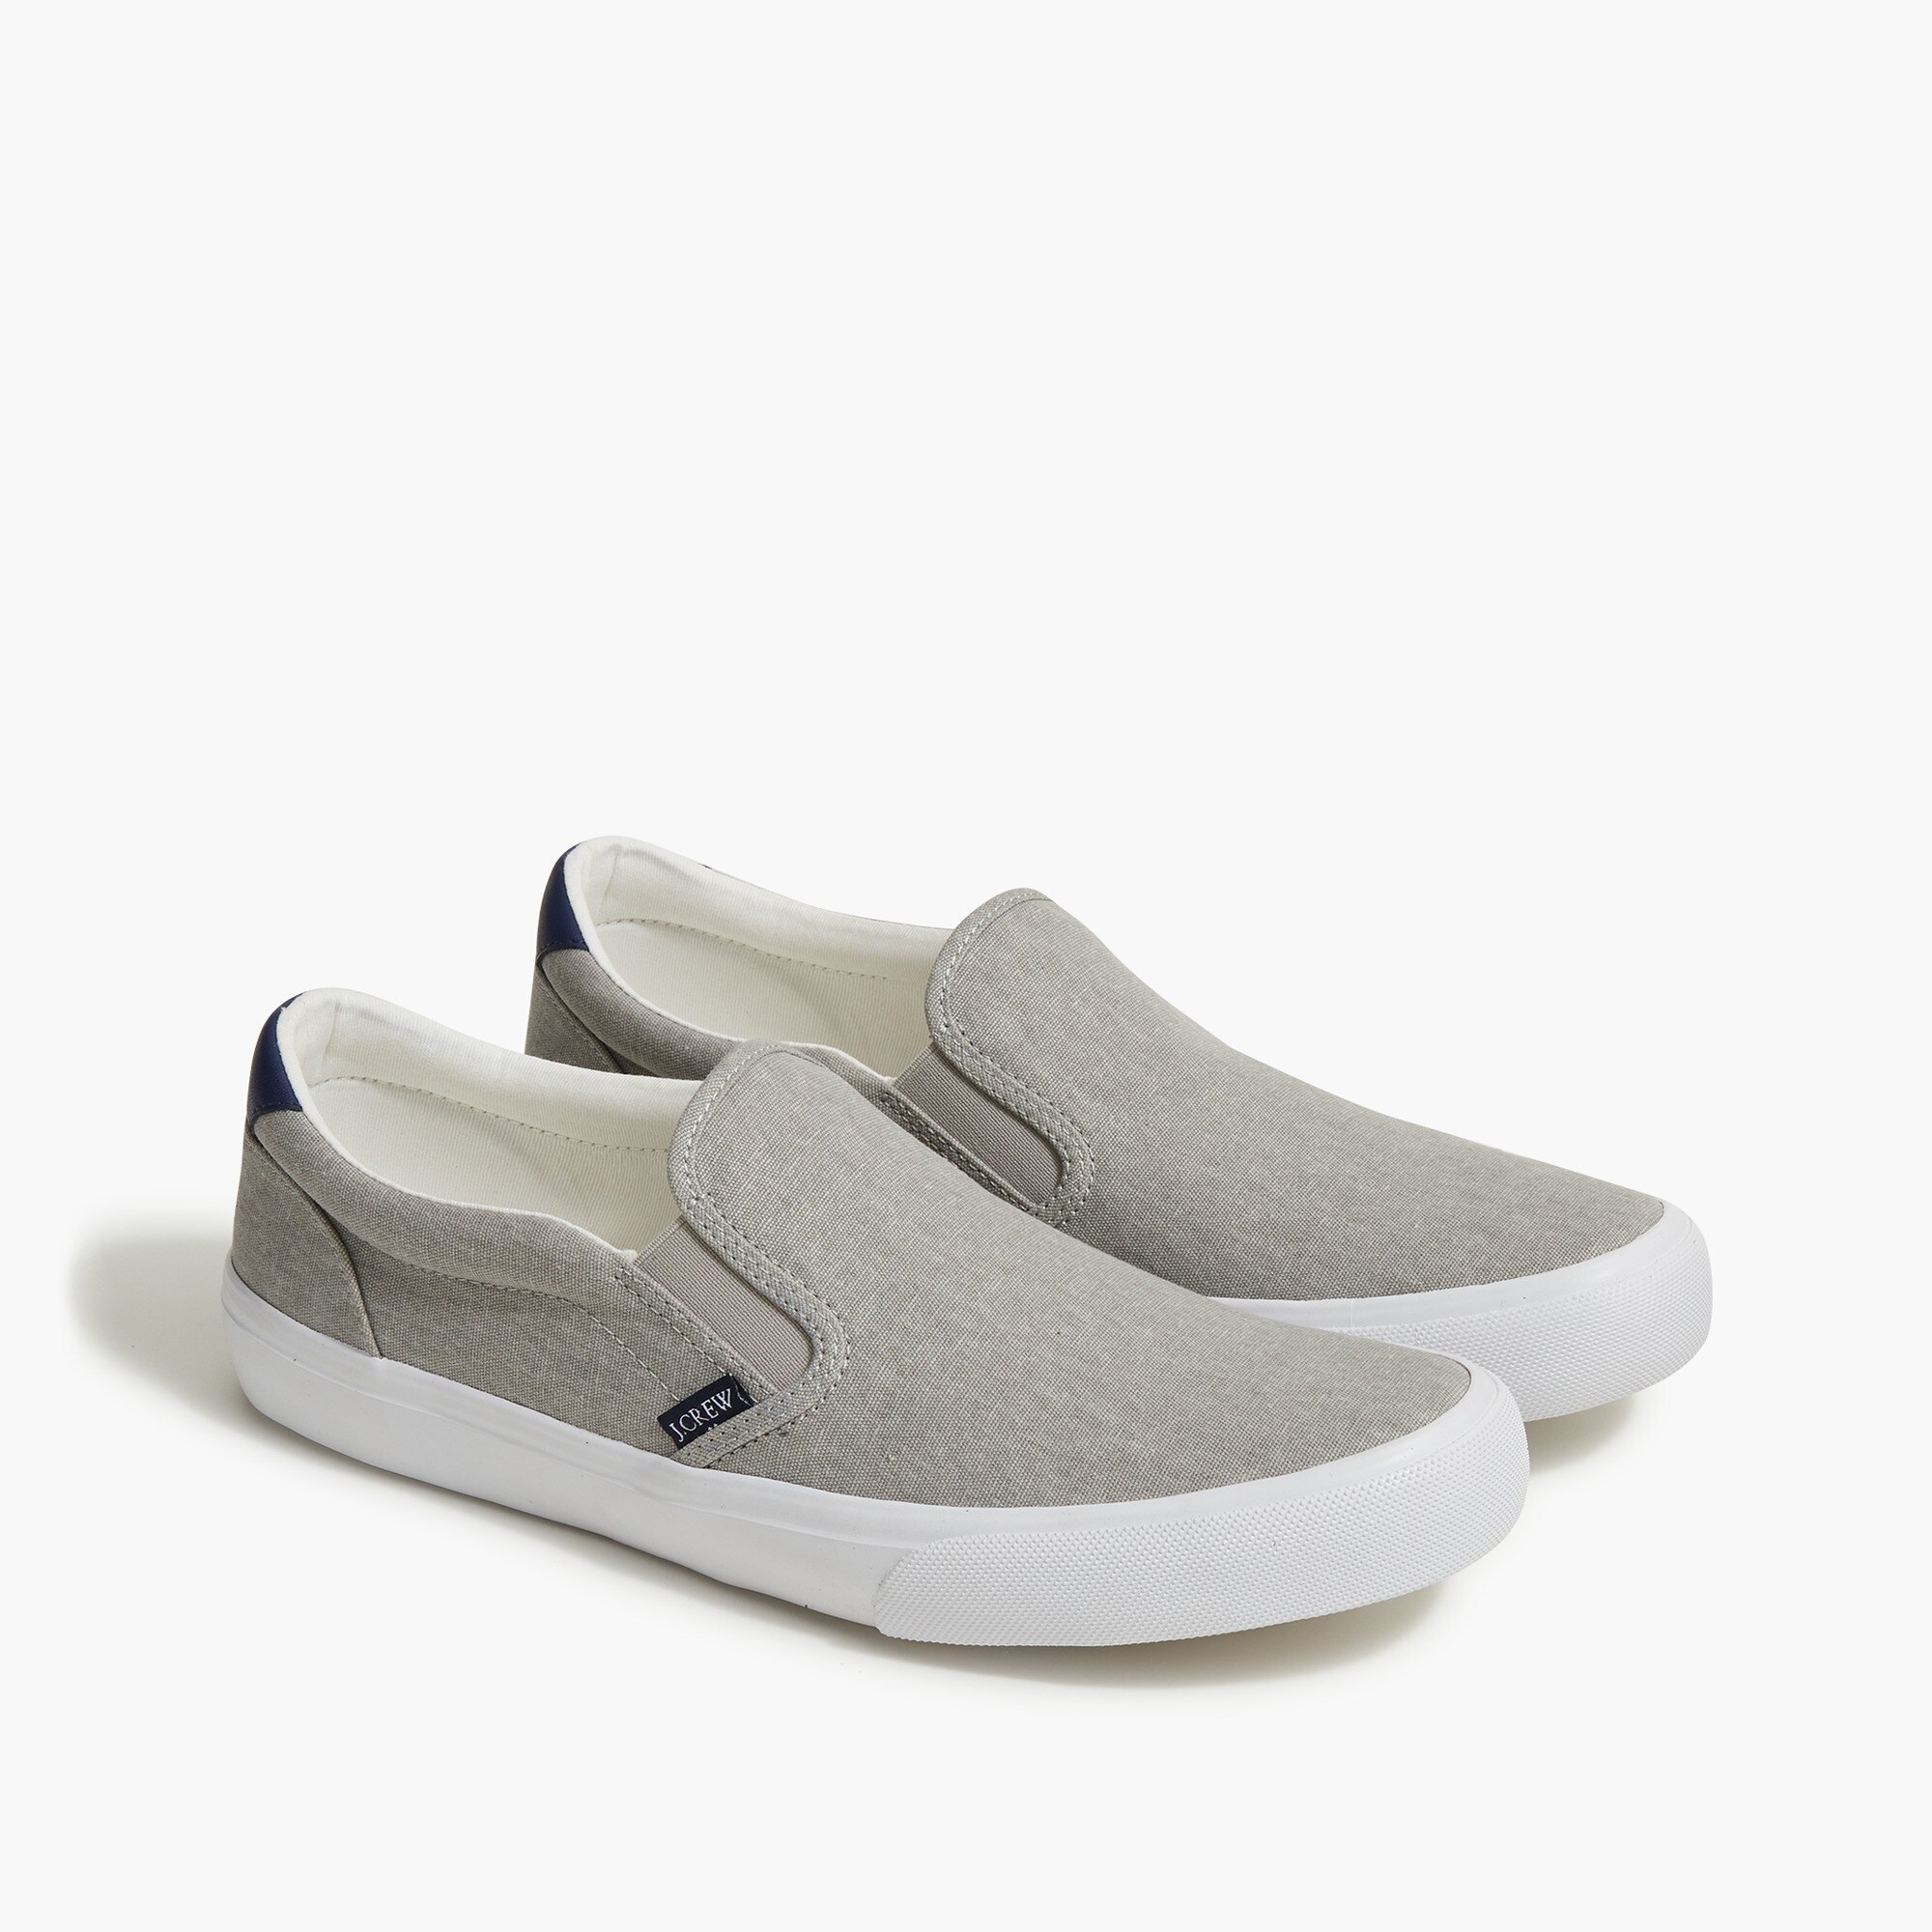  Canvas slip-on sneakers